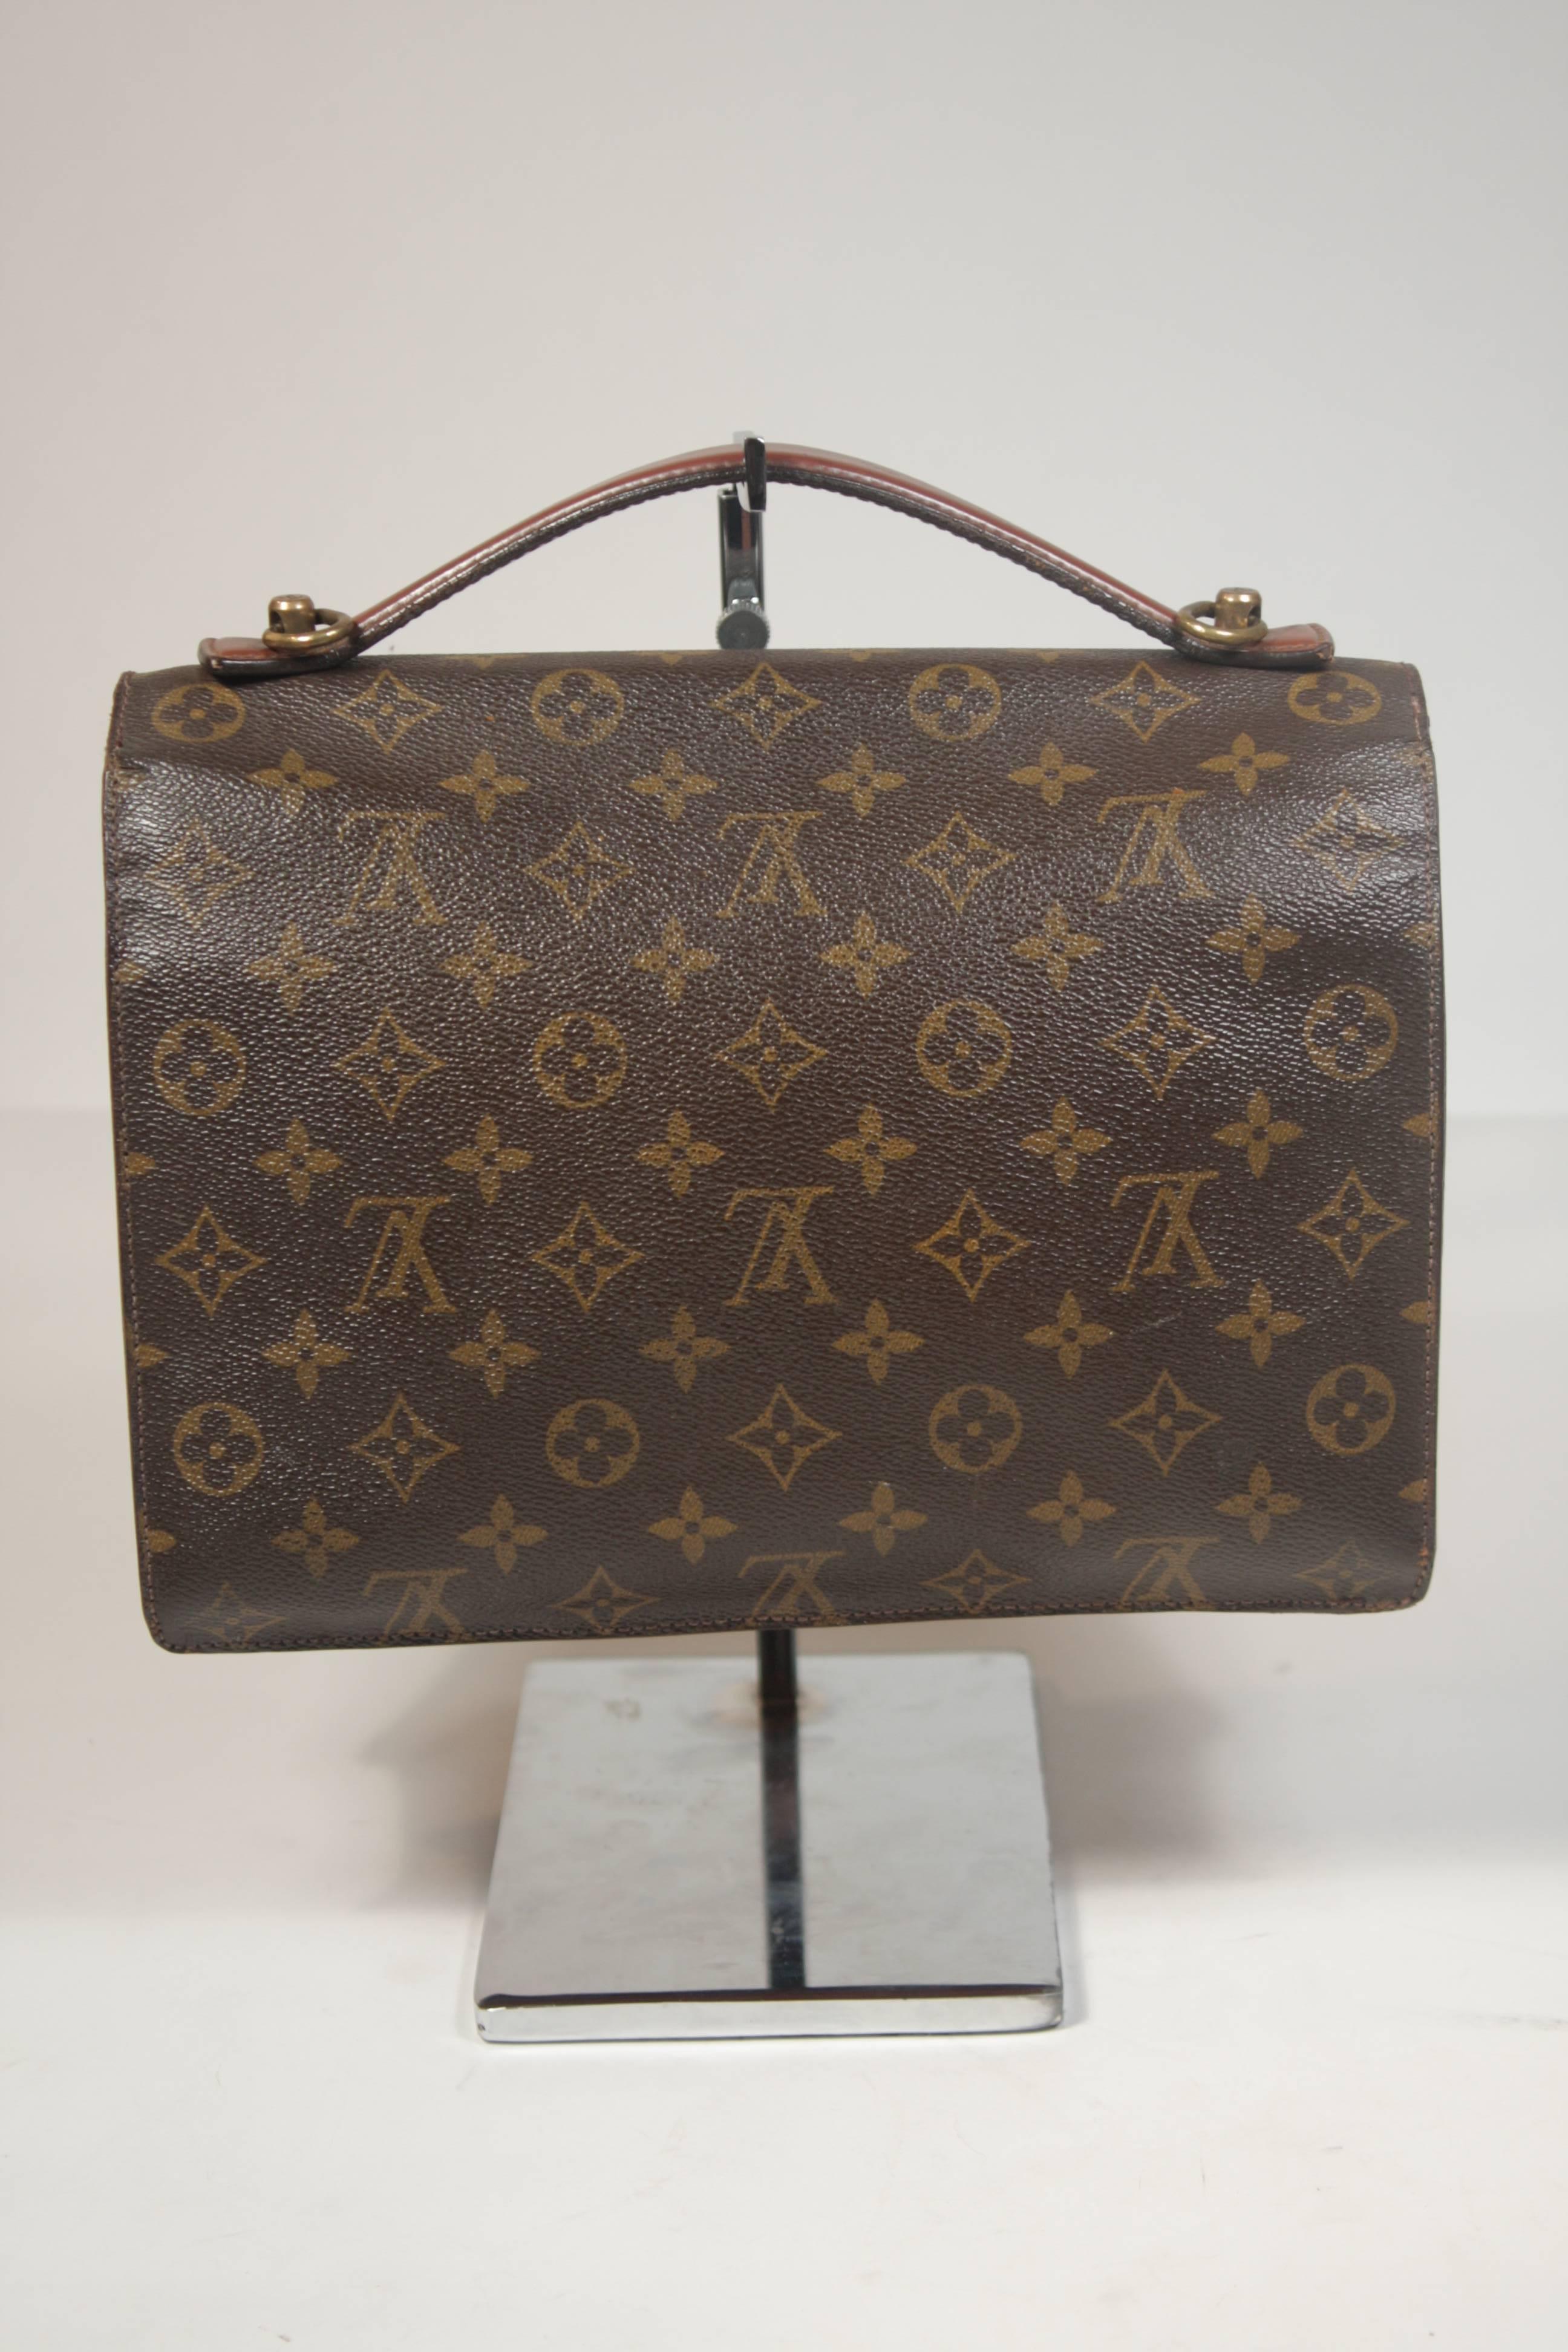 LOUIS VUITTON MONCEAU Top Handle Purse with Optional Cross Body Strap  In Excellent Condition In Los Angeles, CA